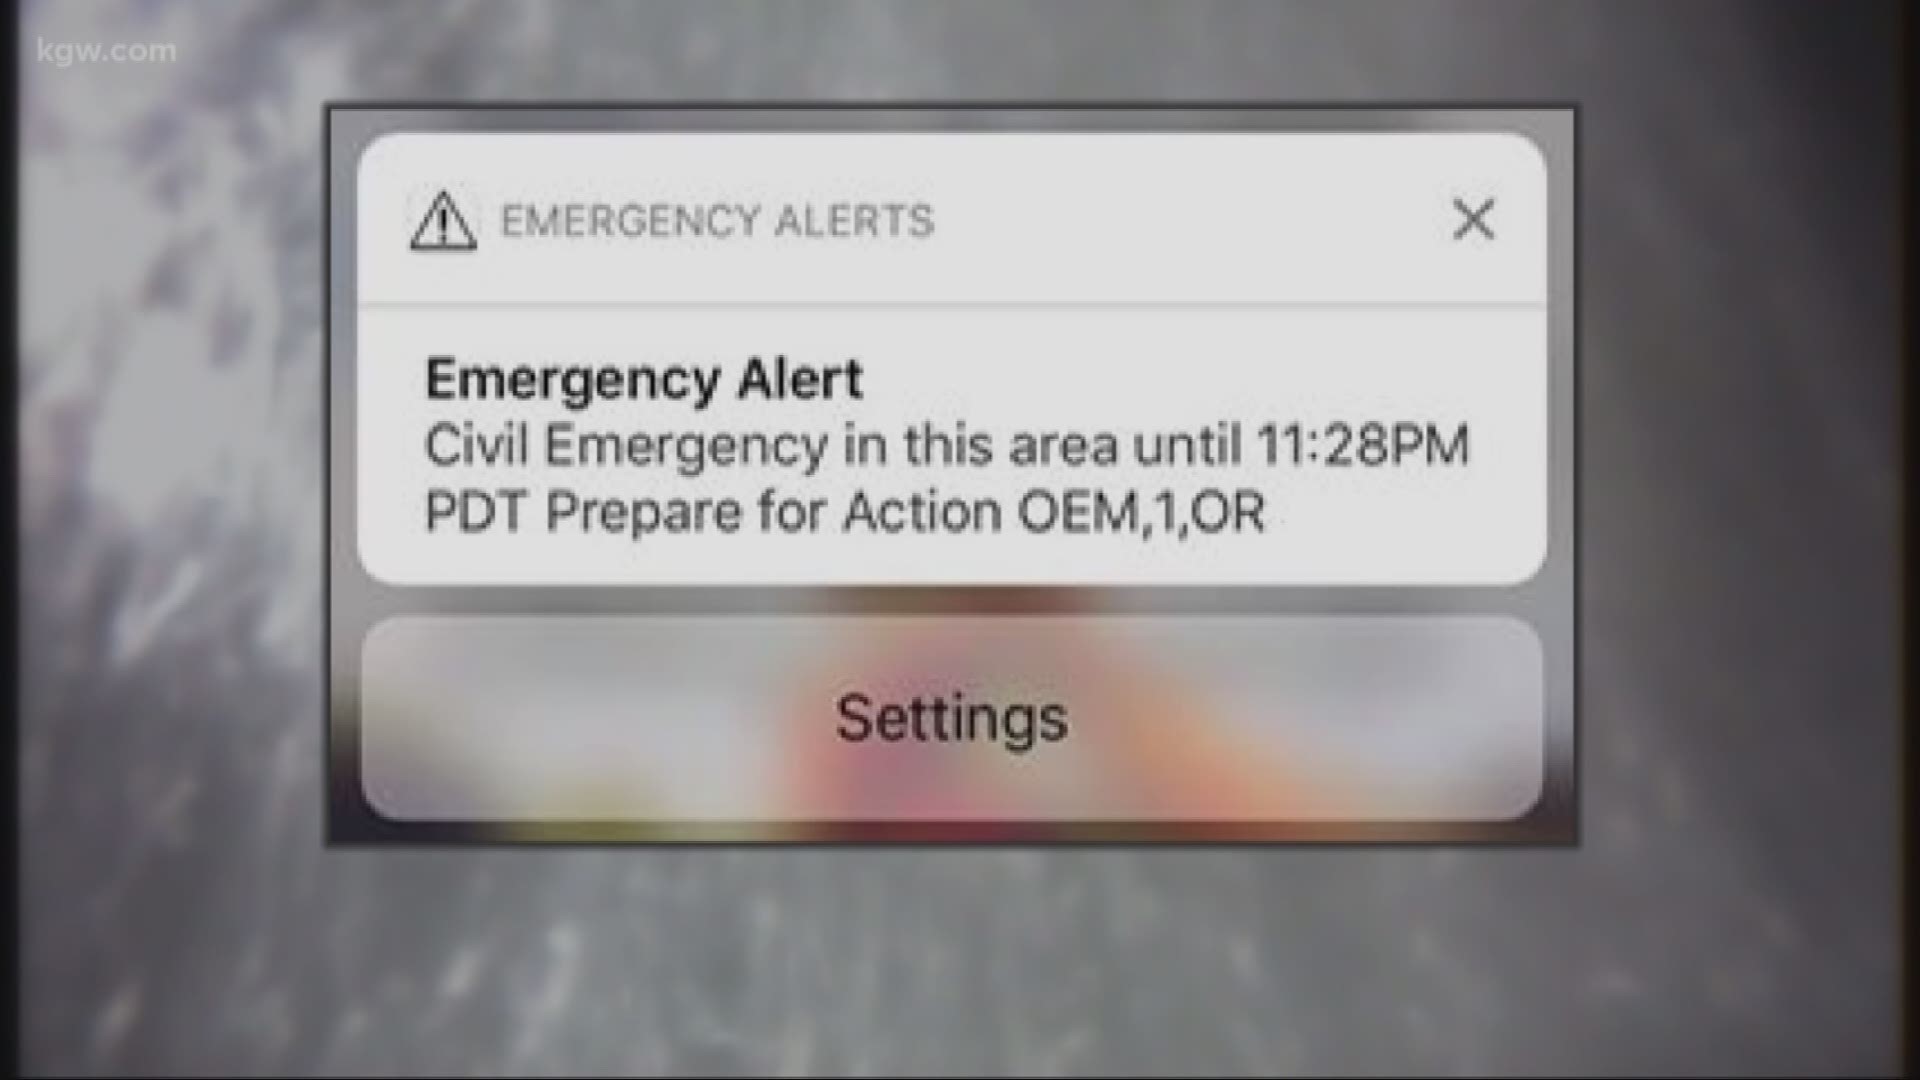 State officials apologize for mystery emergency alert